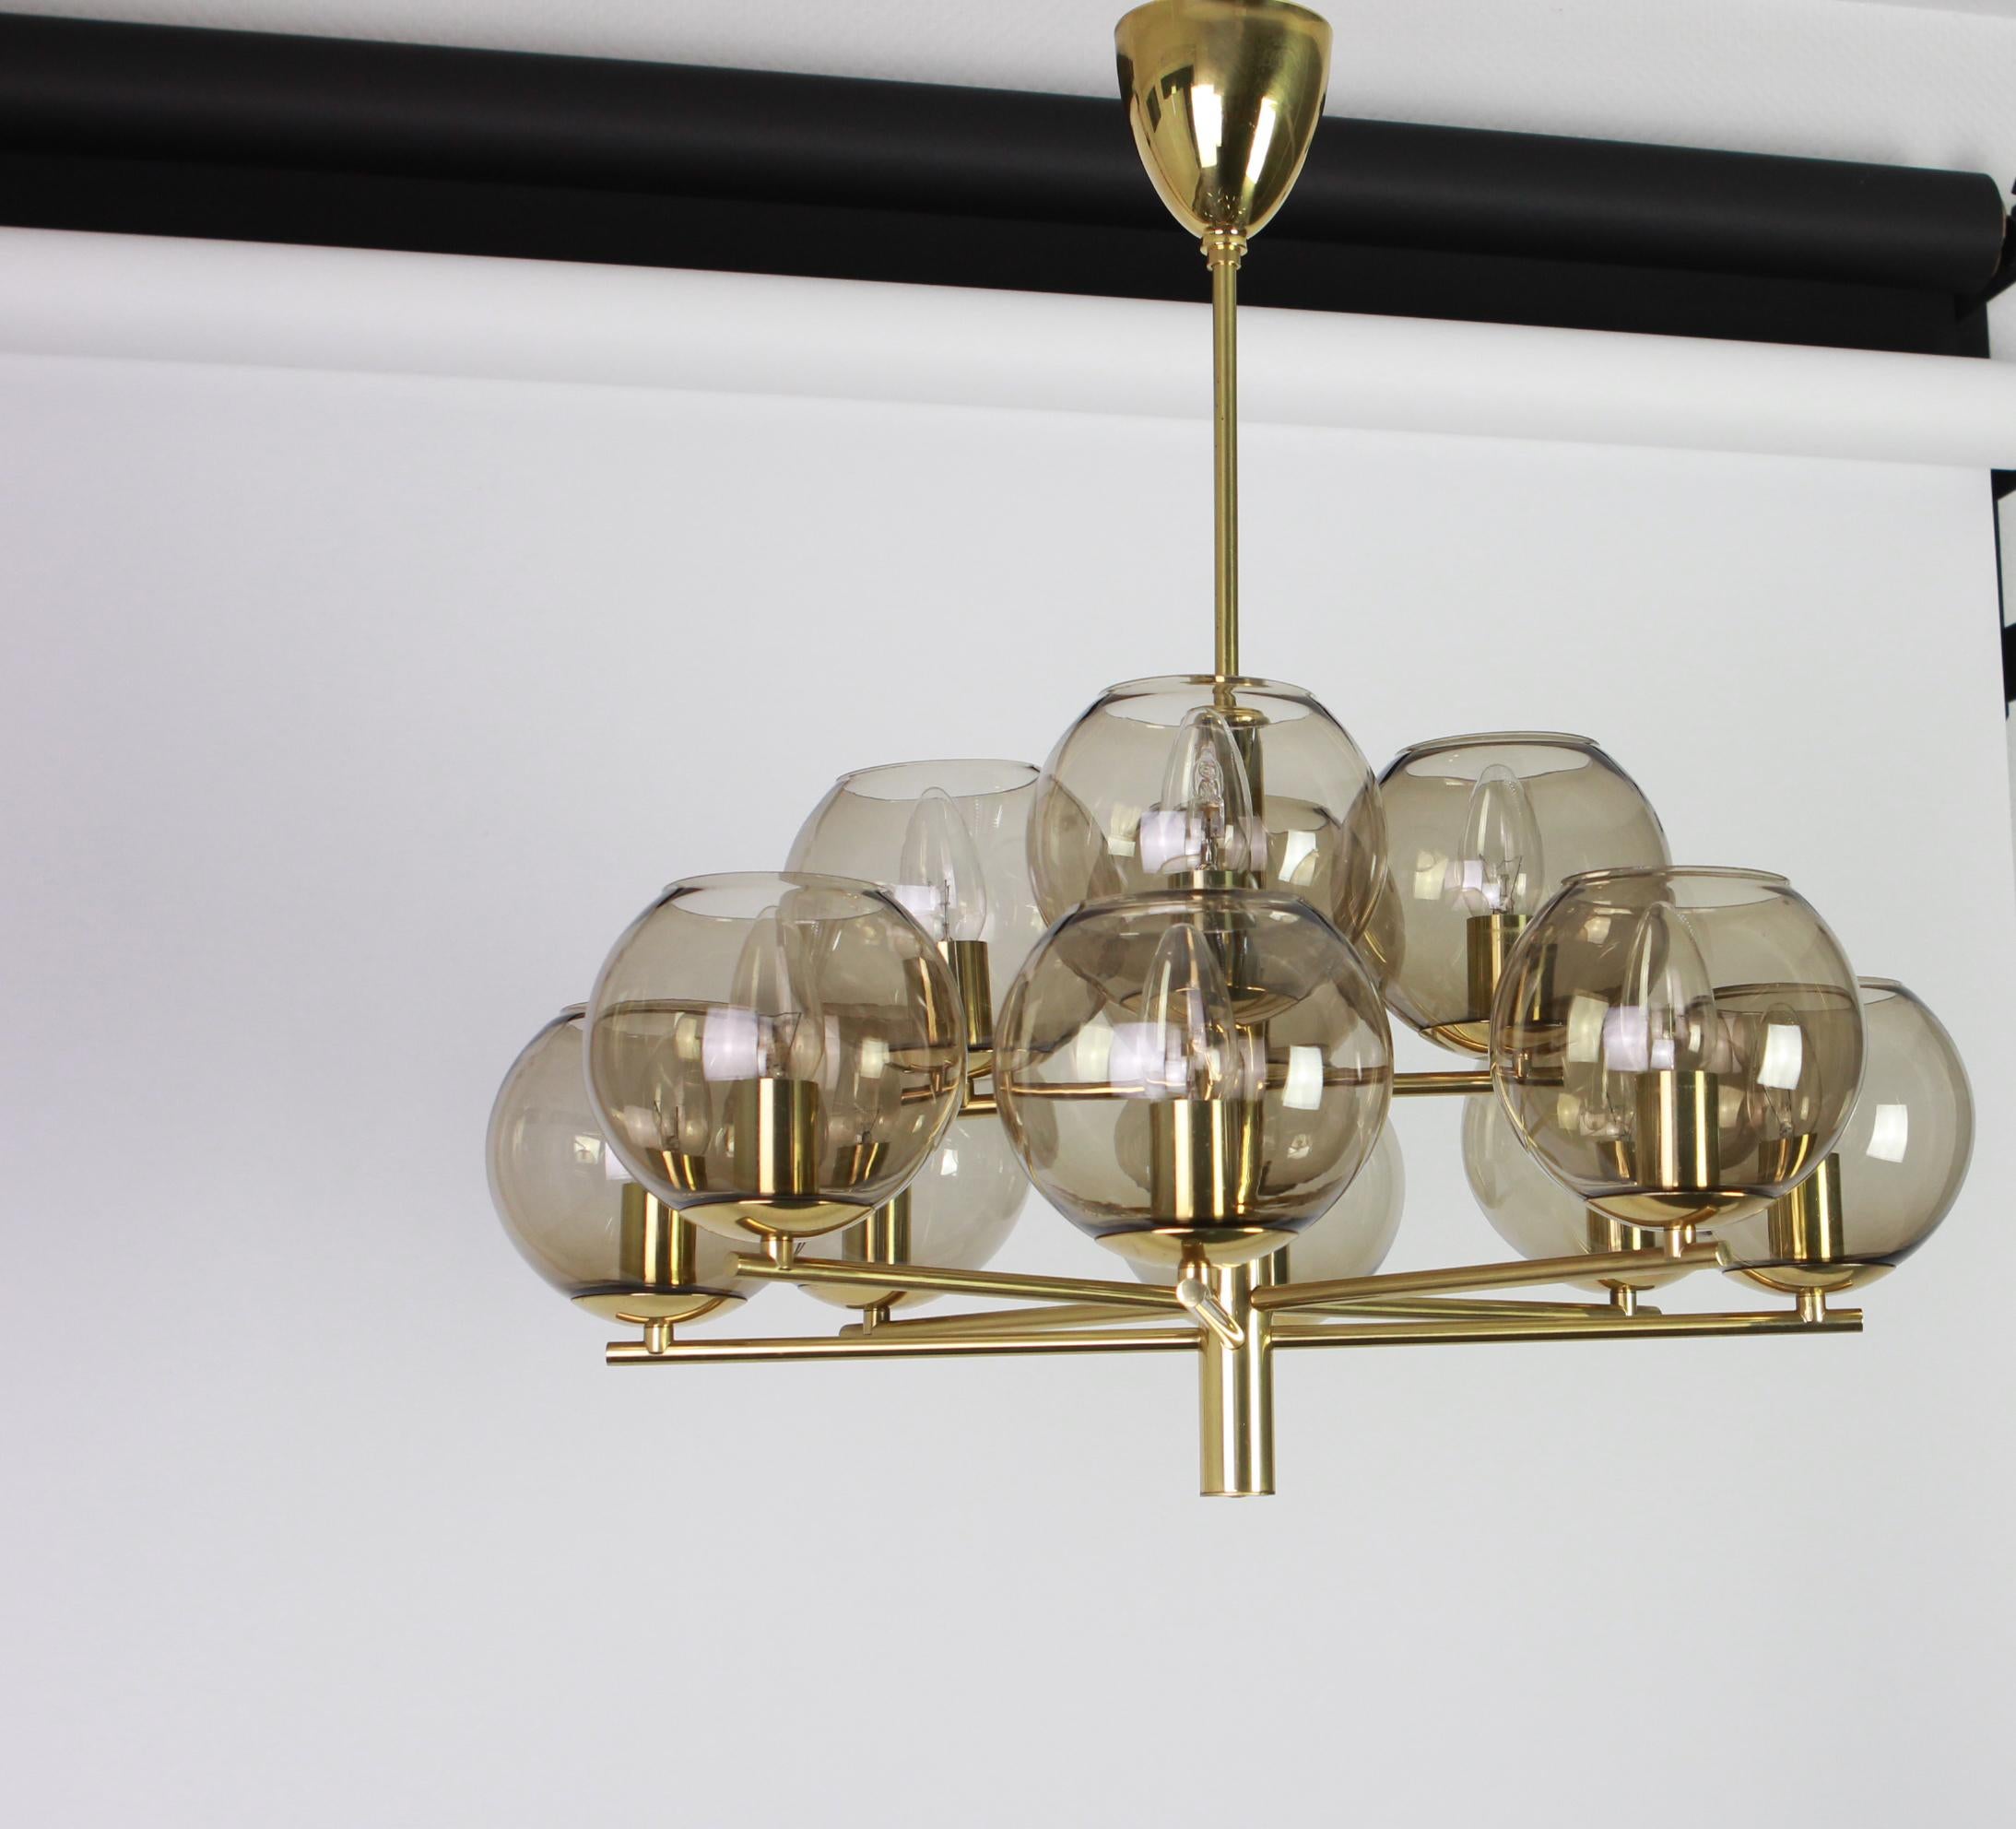 Twelve-light brass chandelier in the style of Sciolari
Smoked glass in a very beautiful smokey brown color on a brass frame, best of the 1960s.

High quality and in very good condition. Cleaned, well-wired and ready to use.
The fixture requires